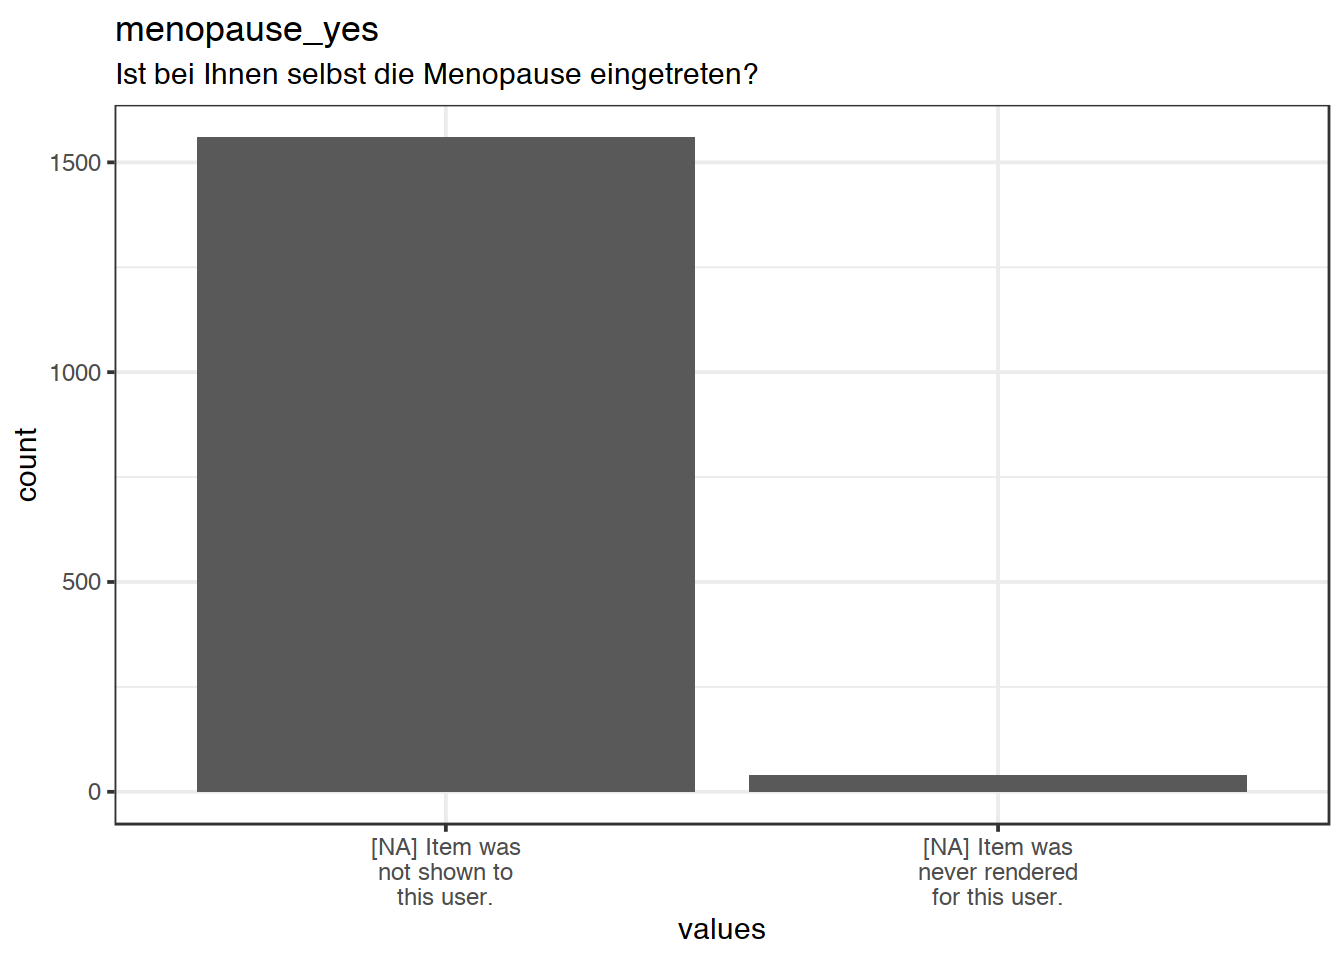 Plot of missing values for menopause_yes